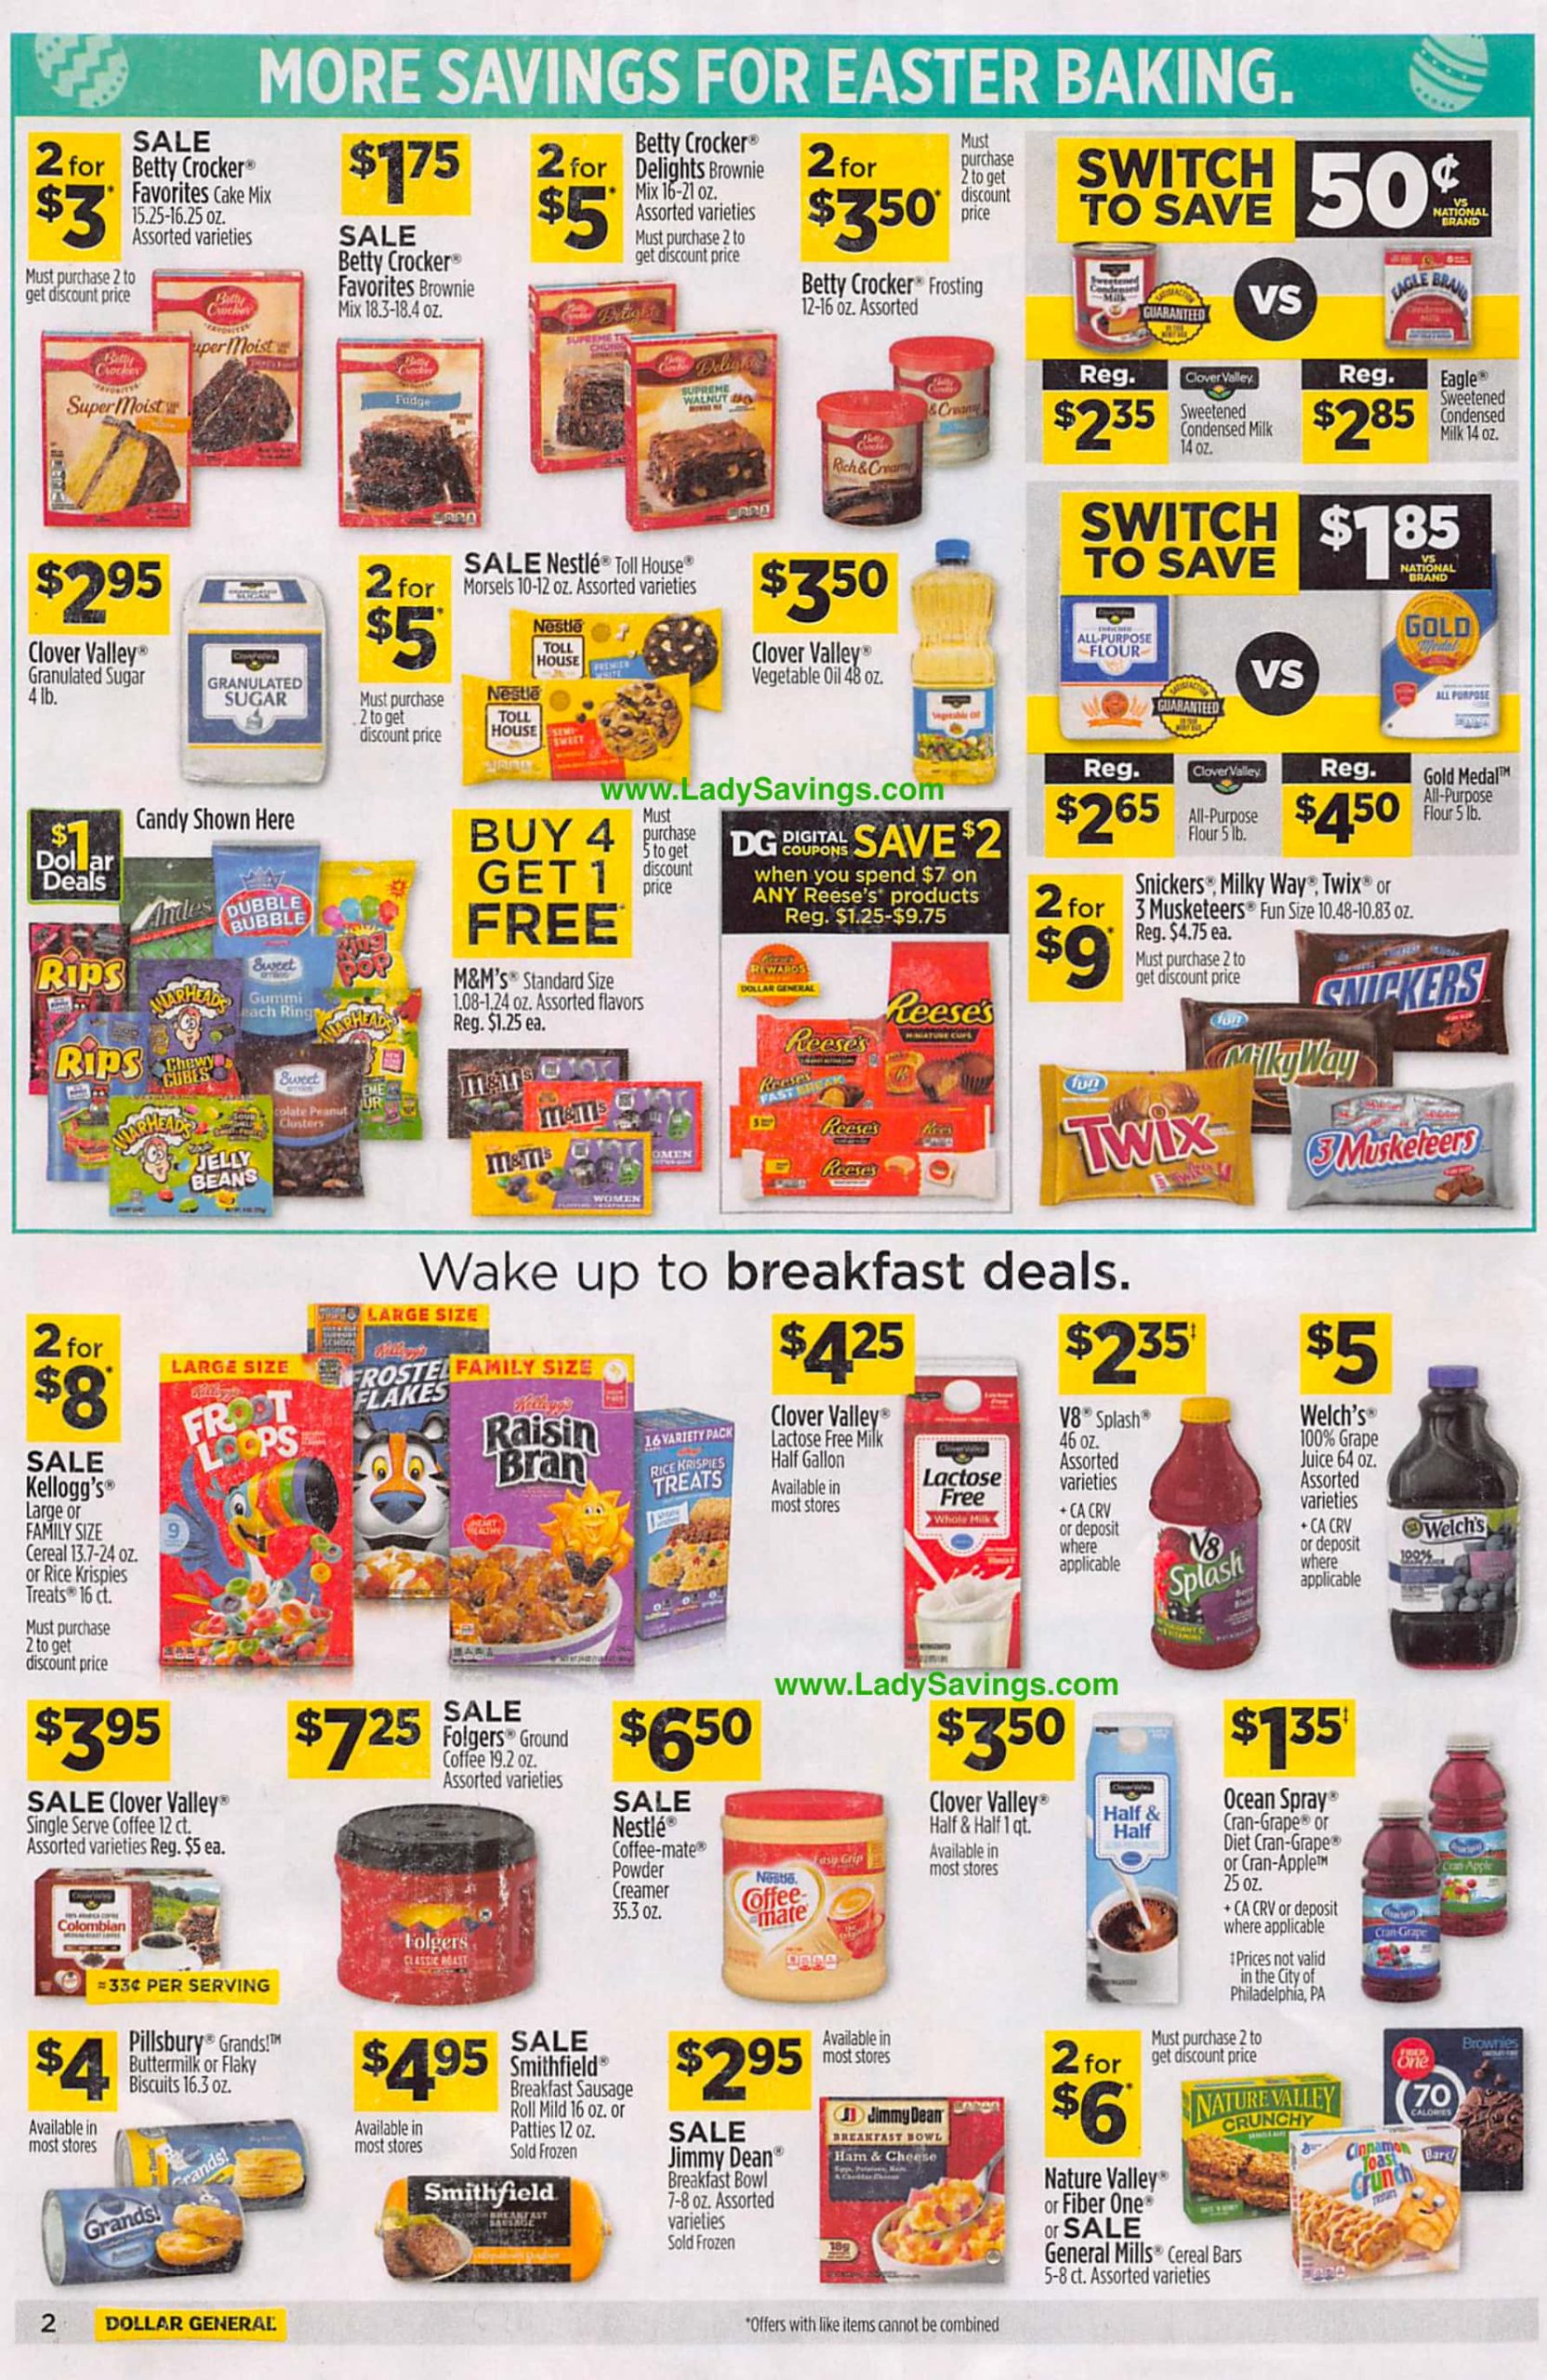 Dollar General ad for this week Preview valid for March 26 - April 1, 2023